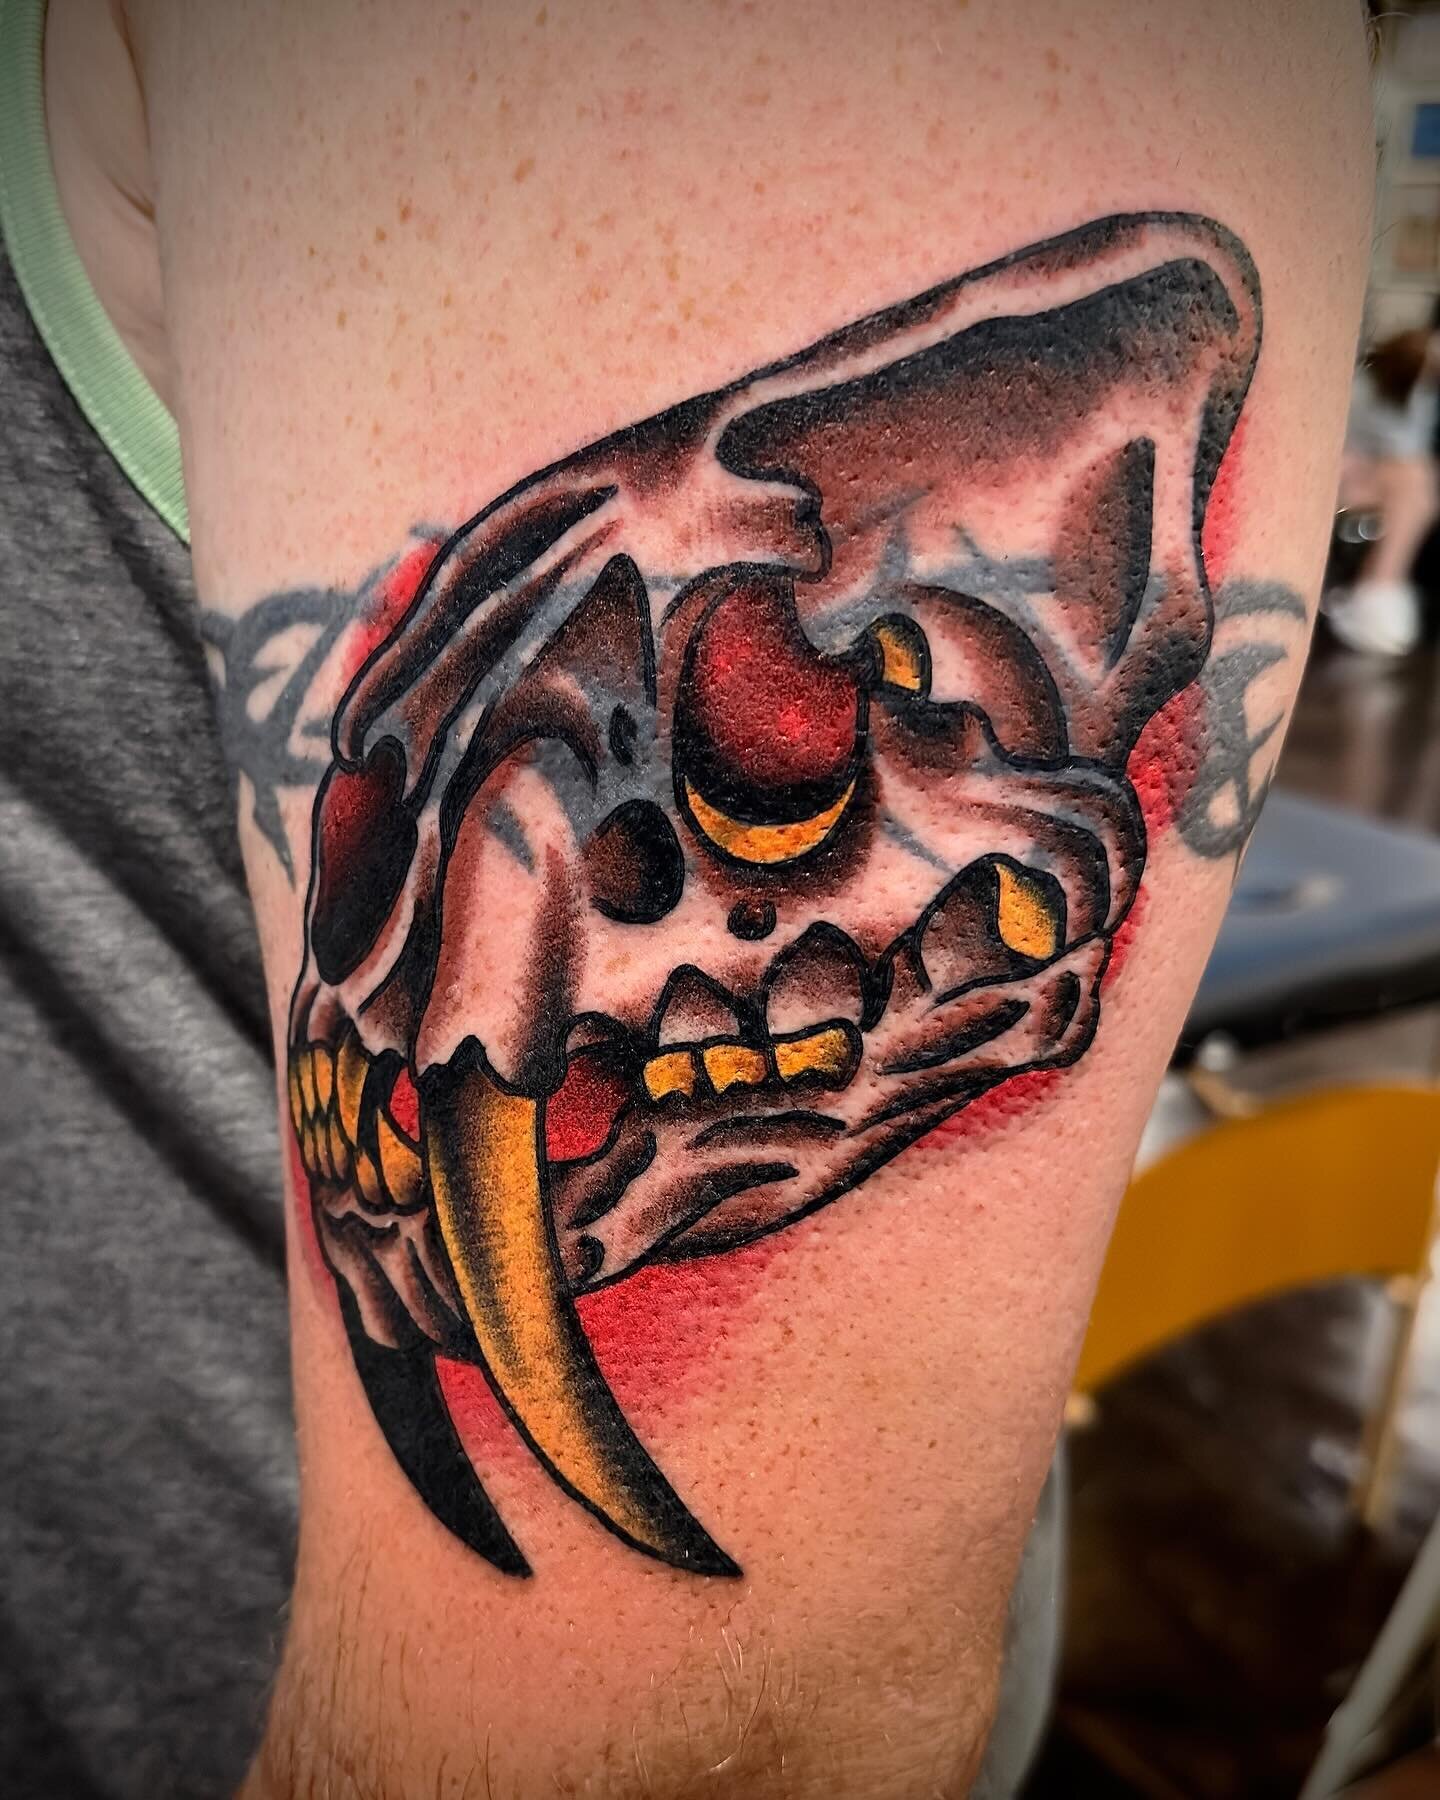 Here&rsquo;s another blastover and start of a prehistoric sleeve.  Thanks for looking!